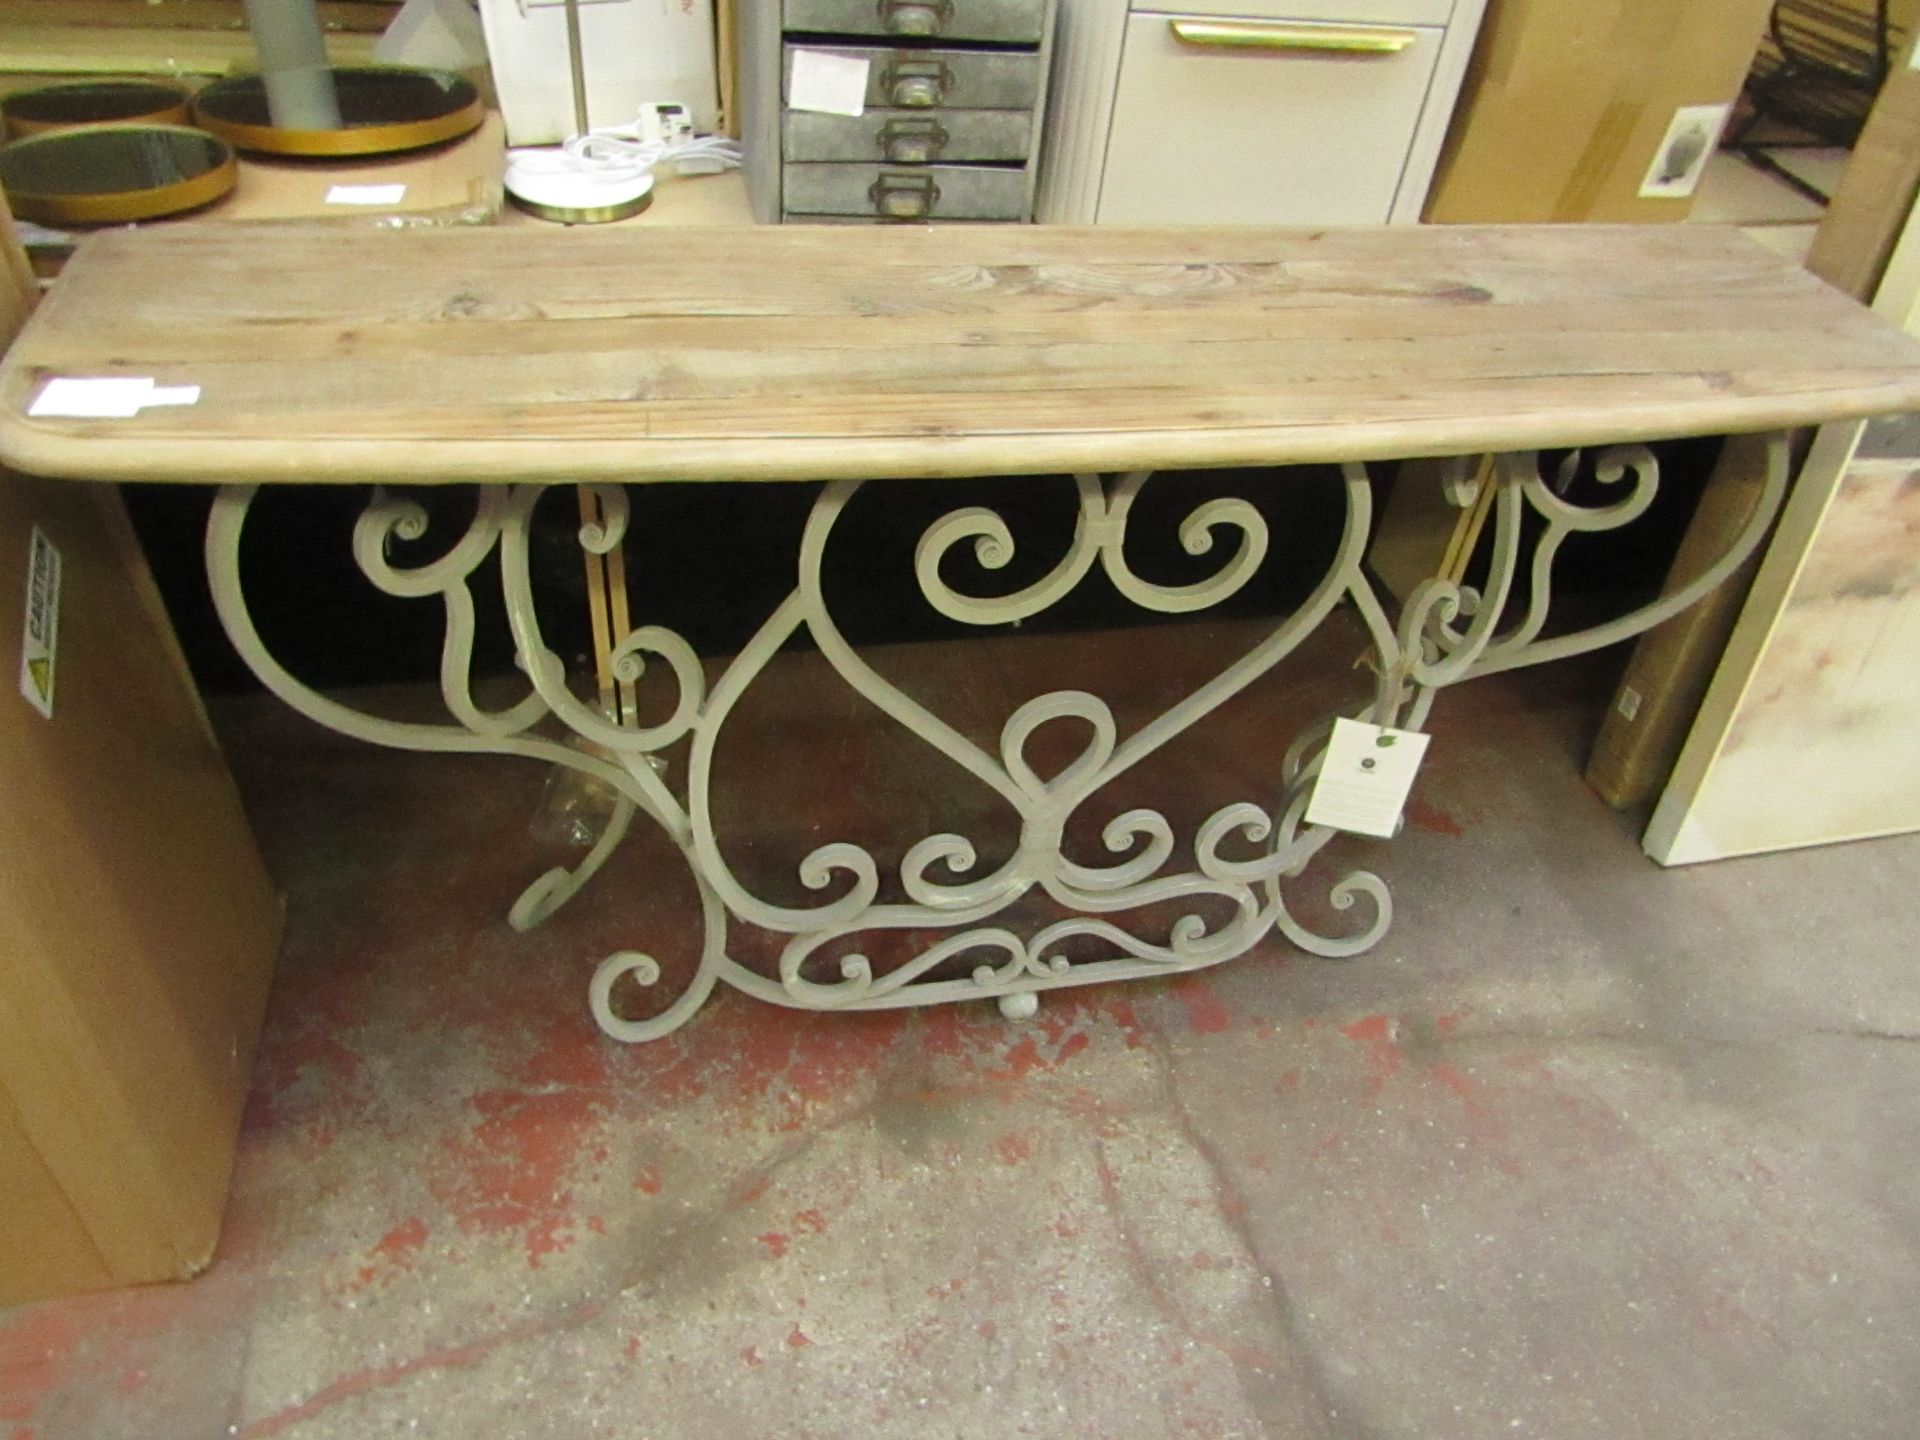 1 x Cox & Cox Ironwork Console Table RRP £1200.00 SKU COX-AP-1221388 TOTAL RRP £1200 This lot is a